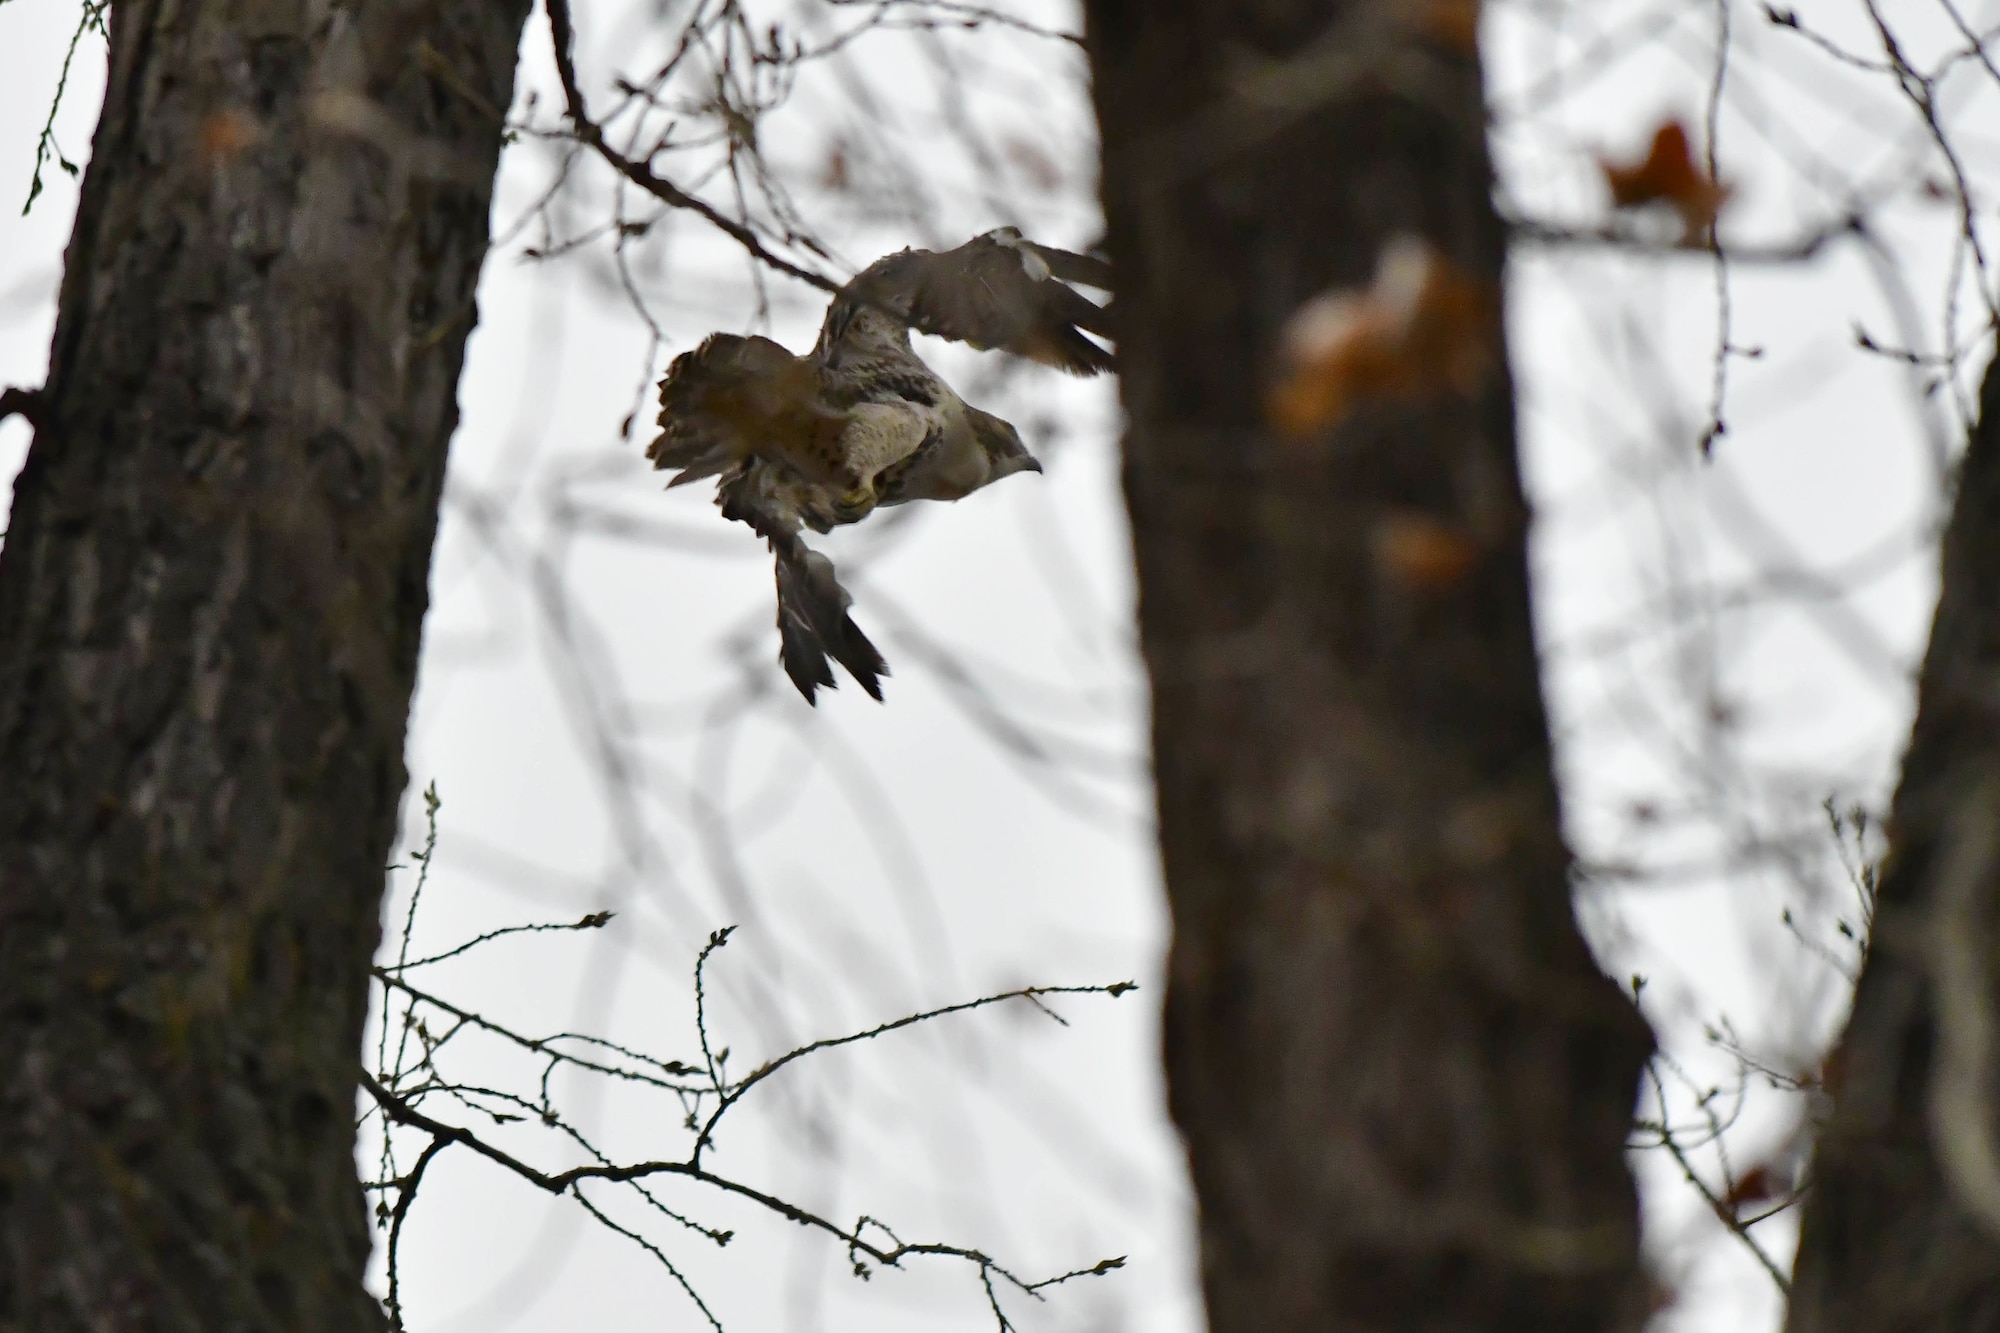 A Swainson's hawk takes off in flight after being released by Dakota Zoo employees November 15, 2018, in a forested area near Bismarck, North Dakota. The hawk was tended to for more than a month at the zoo after being discovered injured at Grand Forks Air Force Base, N.D., and delivered to the zoo's rehabilitation center for birds of prey. (Courtesy photo by Mike LaLonde/Dakota Zoo)